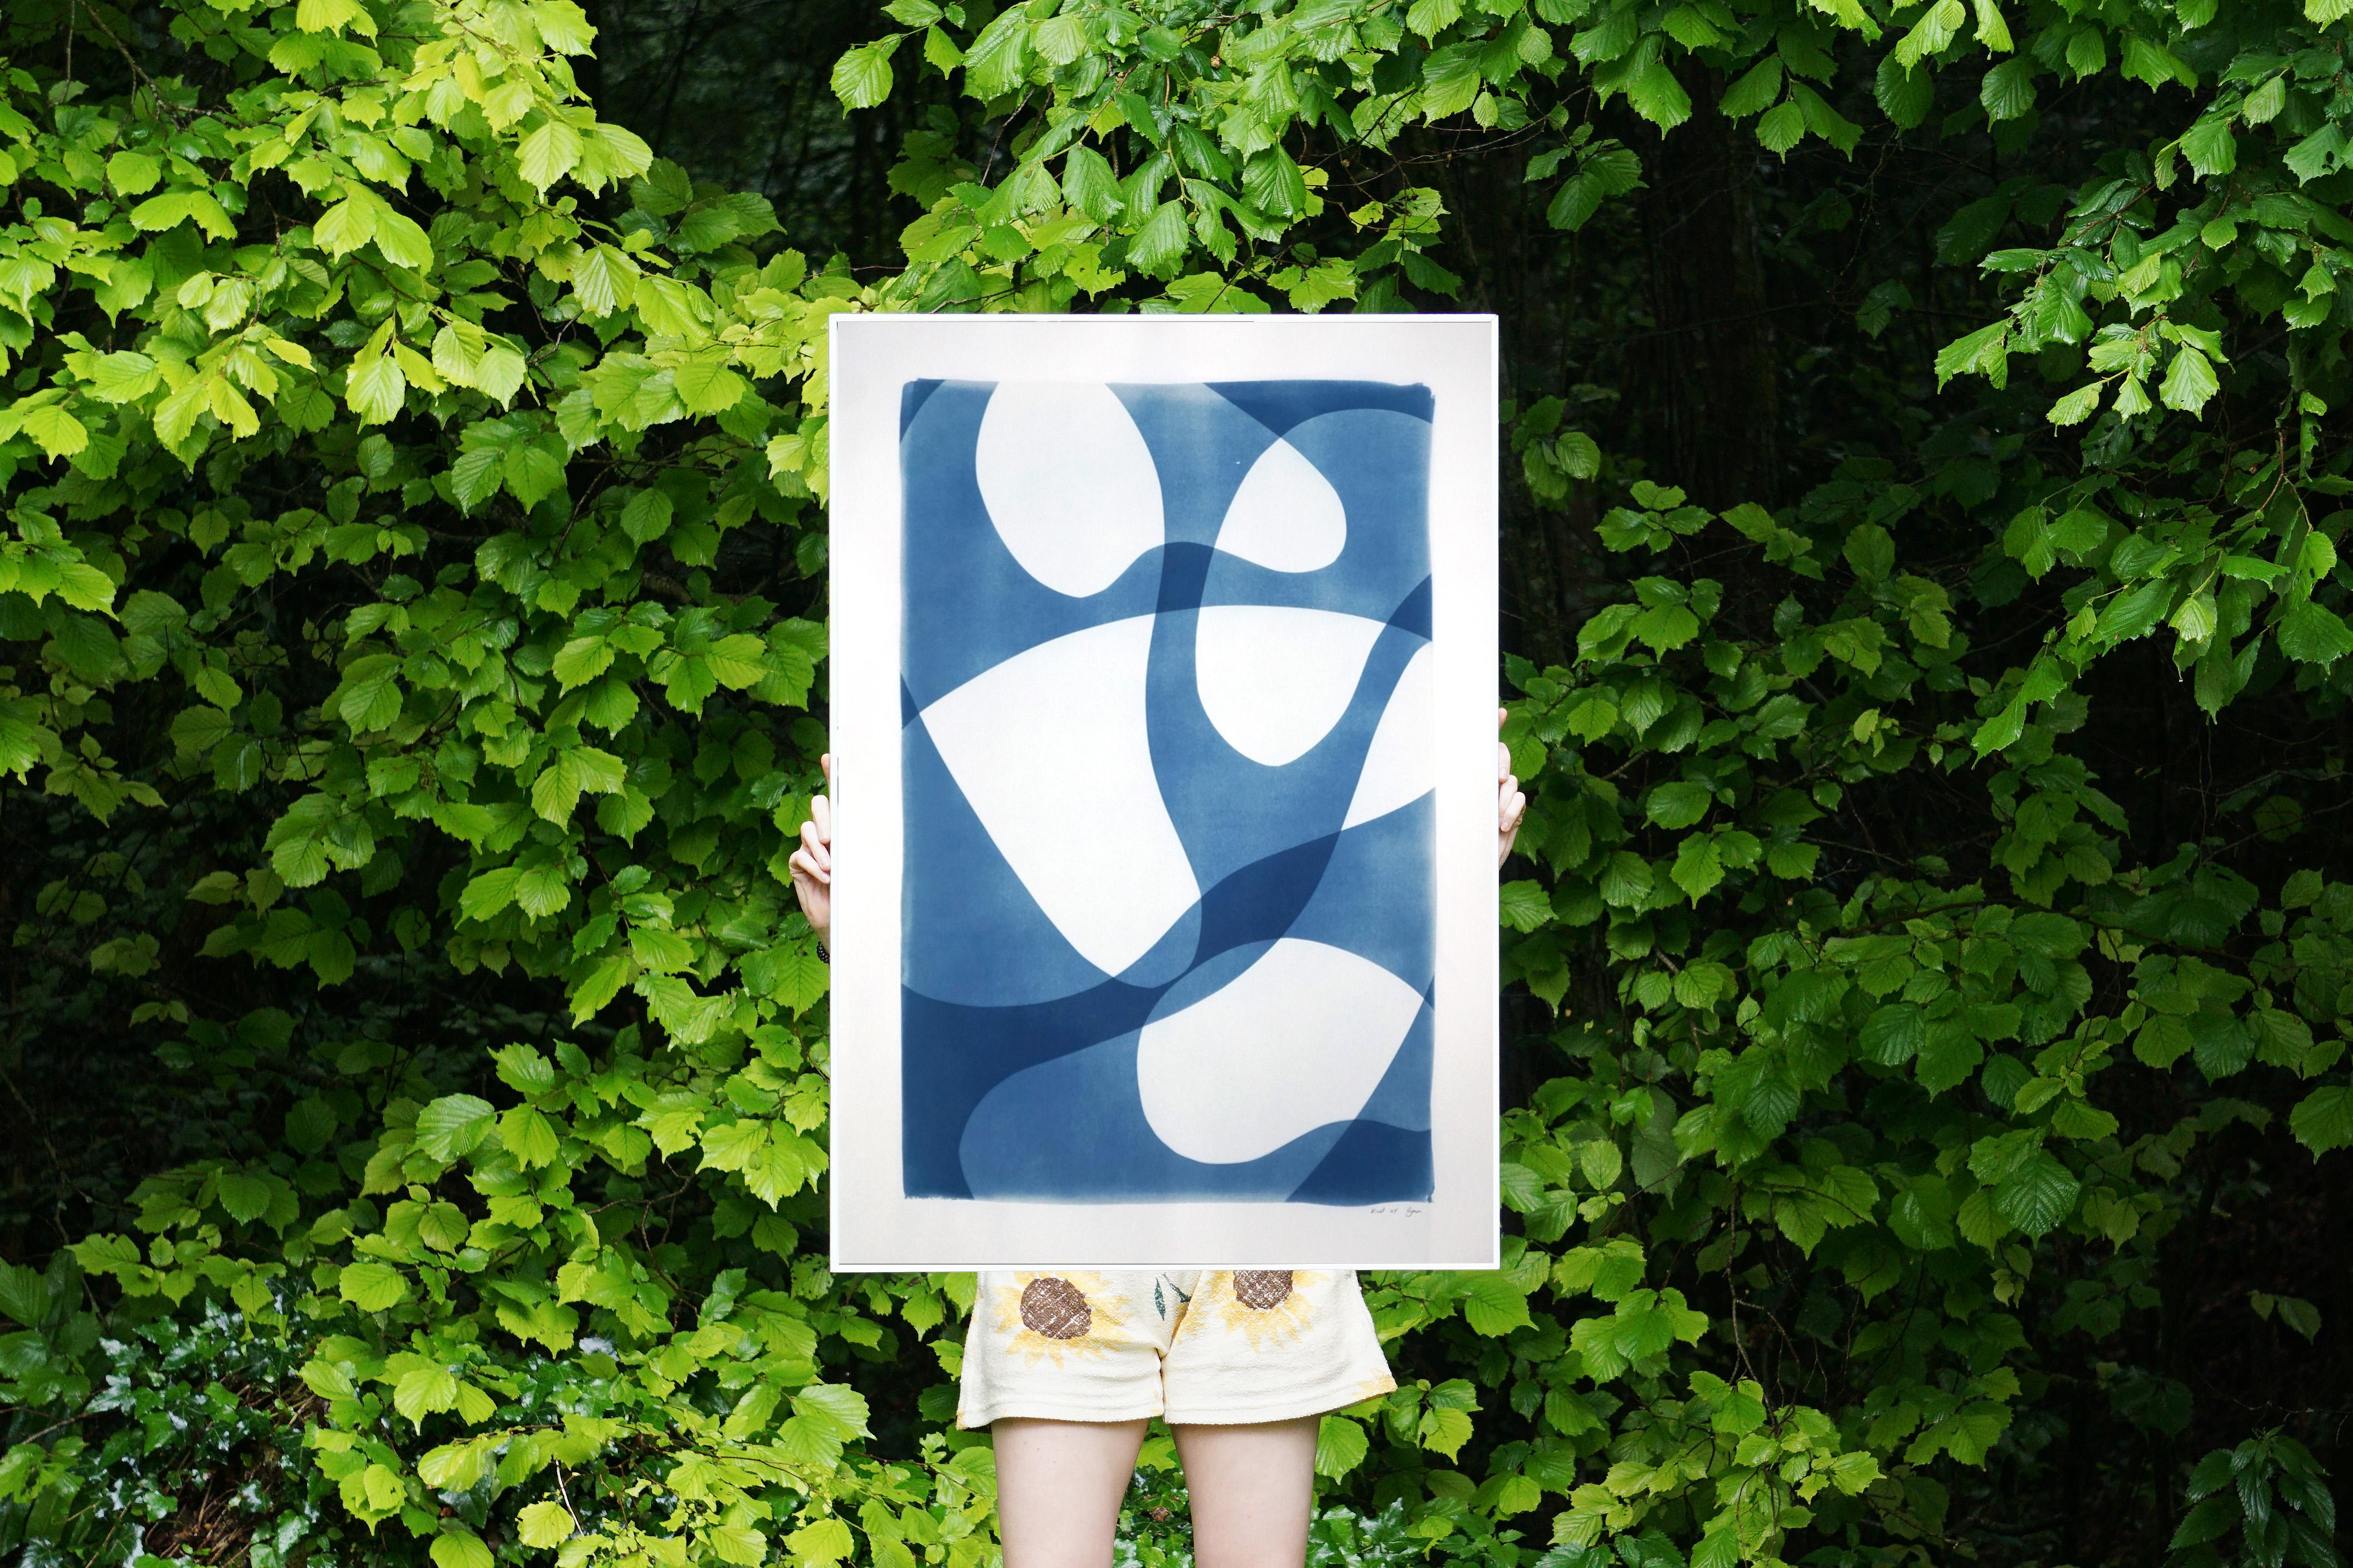 This is an exclusive handprinted unique cyanotype that takes its inspiration from the mid-century modern shapes.
It's made by layering paper cutouts and different exposures using uv-light. 

Details:
+ Title: Ghostly Pool Shapes 
+ Year: 2021
+